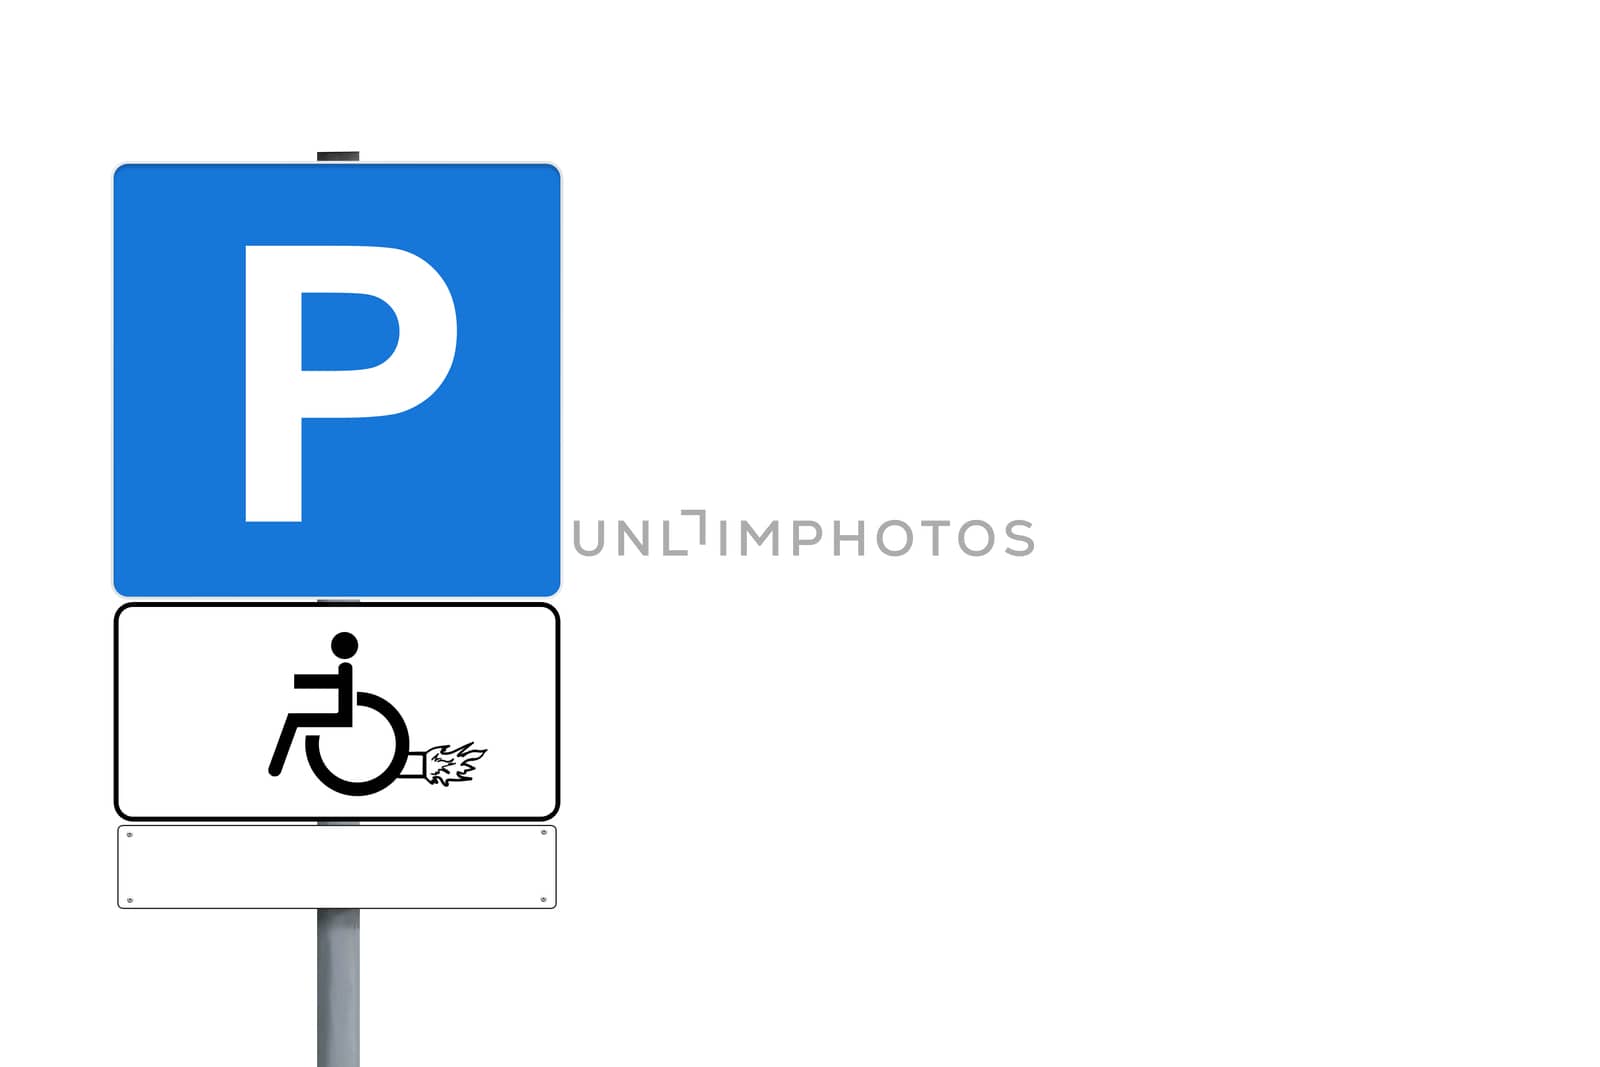 Parking spot for handicapped sign with drawing of rocket, isolated on white with copyspace